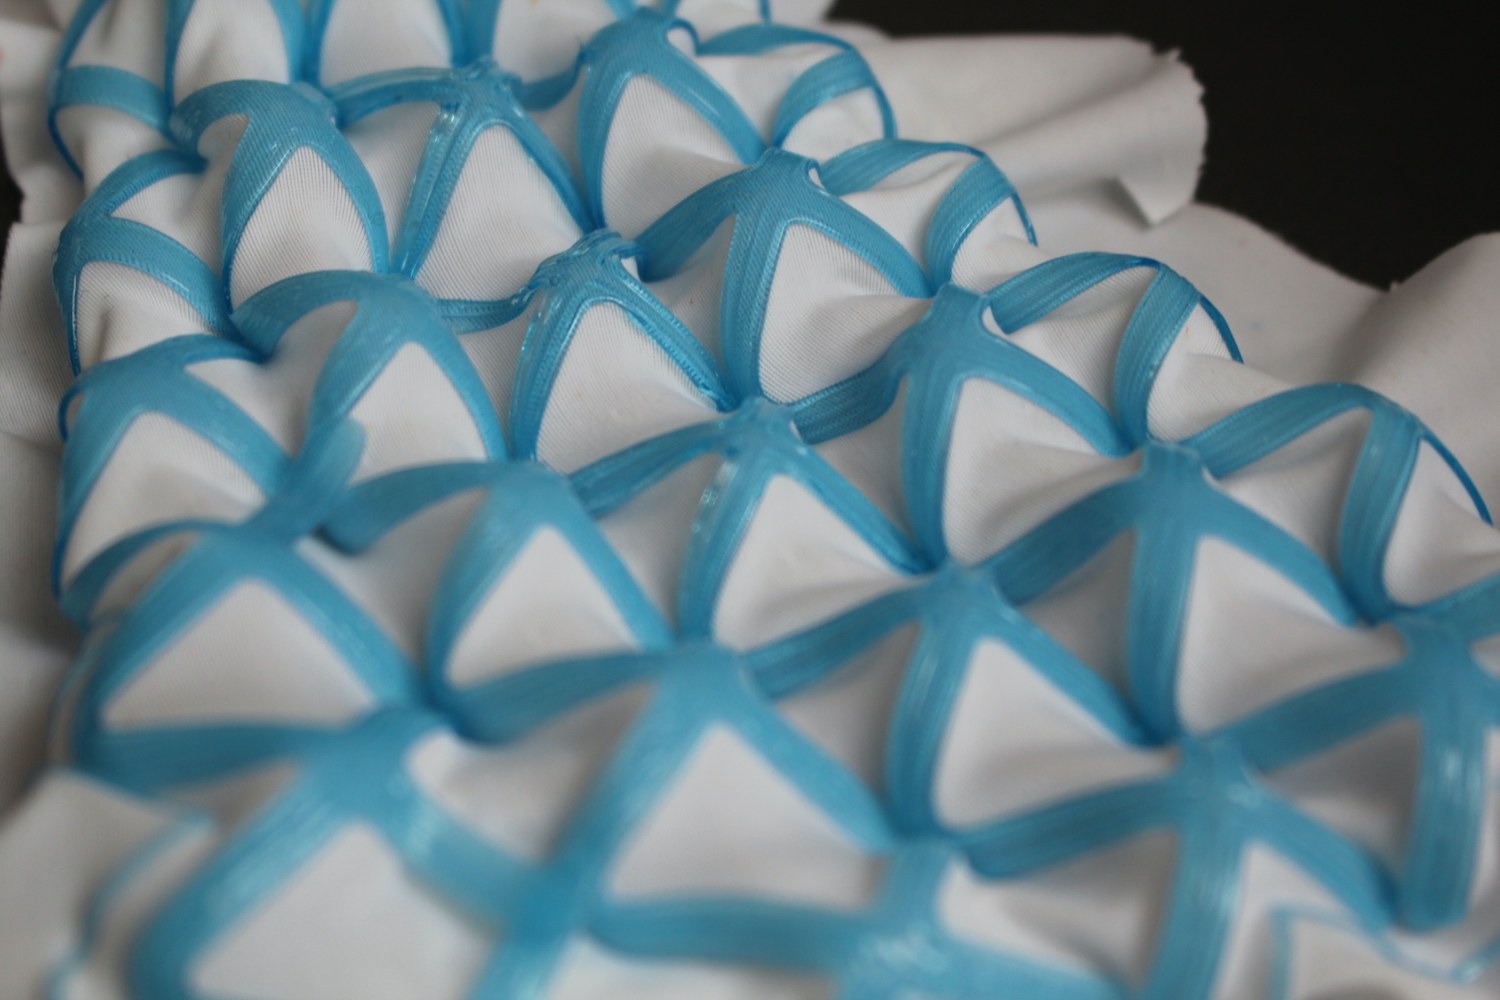 Example of 3D printed warp knitted fabric. © Karl Mayer